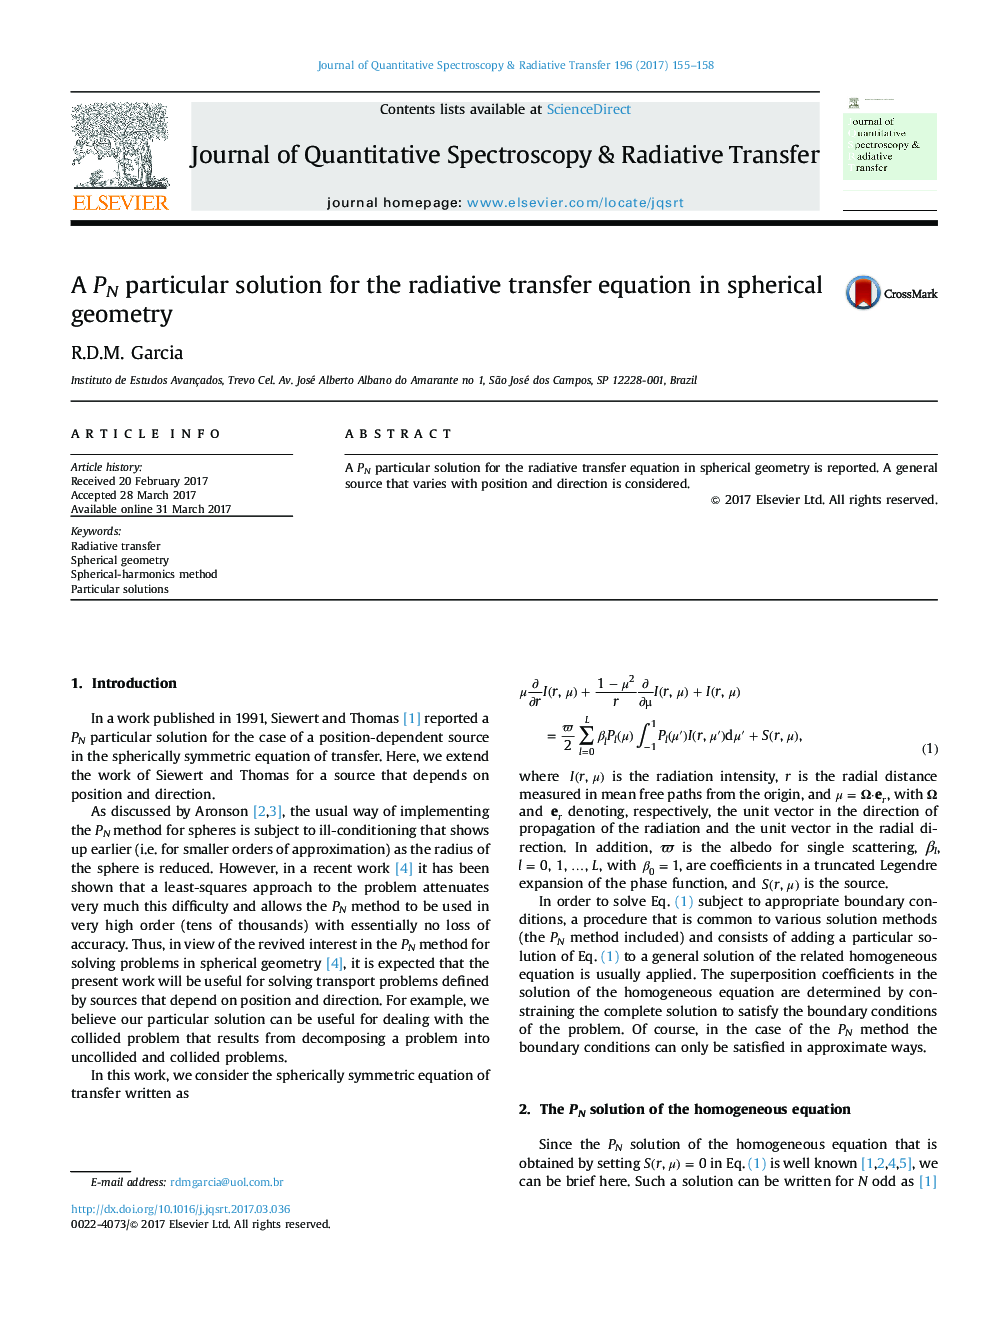 A PN particular solution for the radiative transfer equation in spherical geometry